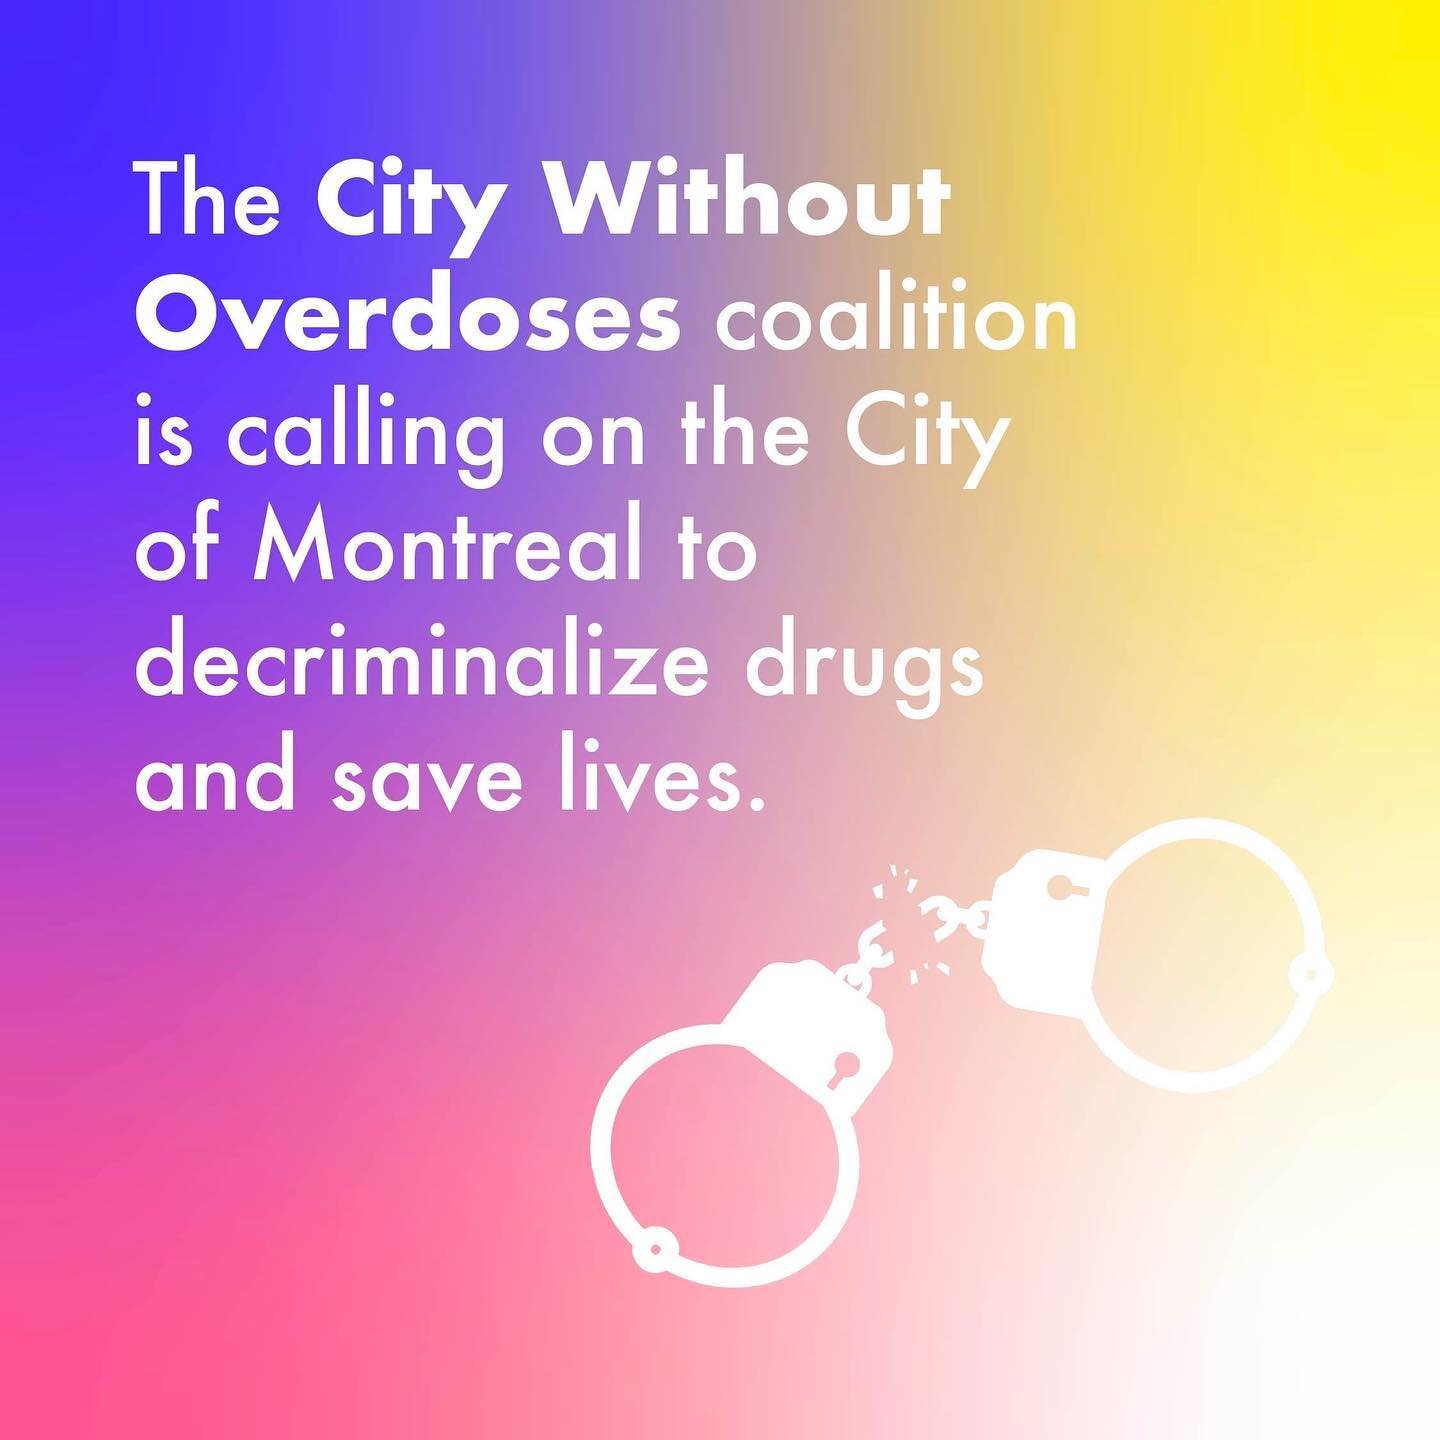 The City Without Overdoses Coalition is demanding that the City of Montreal take action to decriminalize drug possession.

To date, 62 Montr&eacute;al-based groups have joined the struggle:

@actionjeunesseoi 
@astteq 
@accmontreal 
ARCHE de&nbsp;L'E